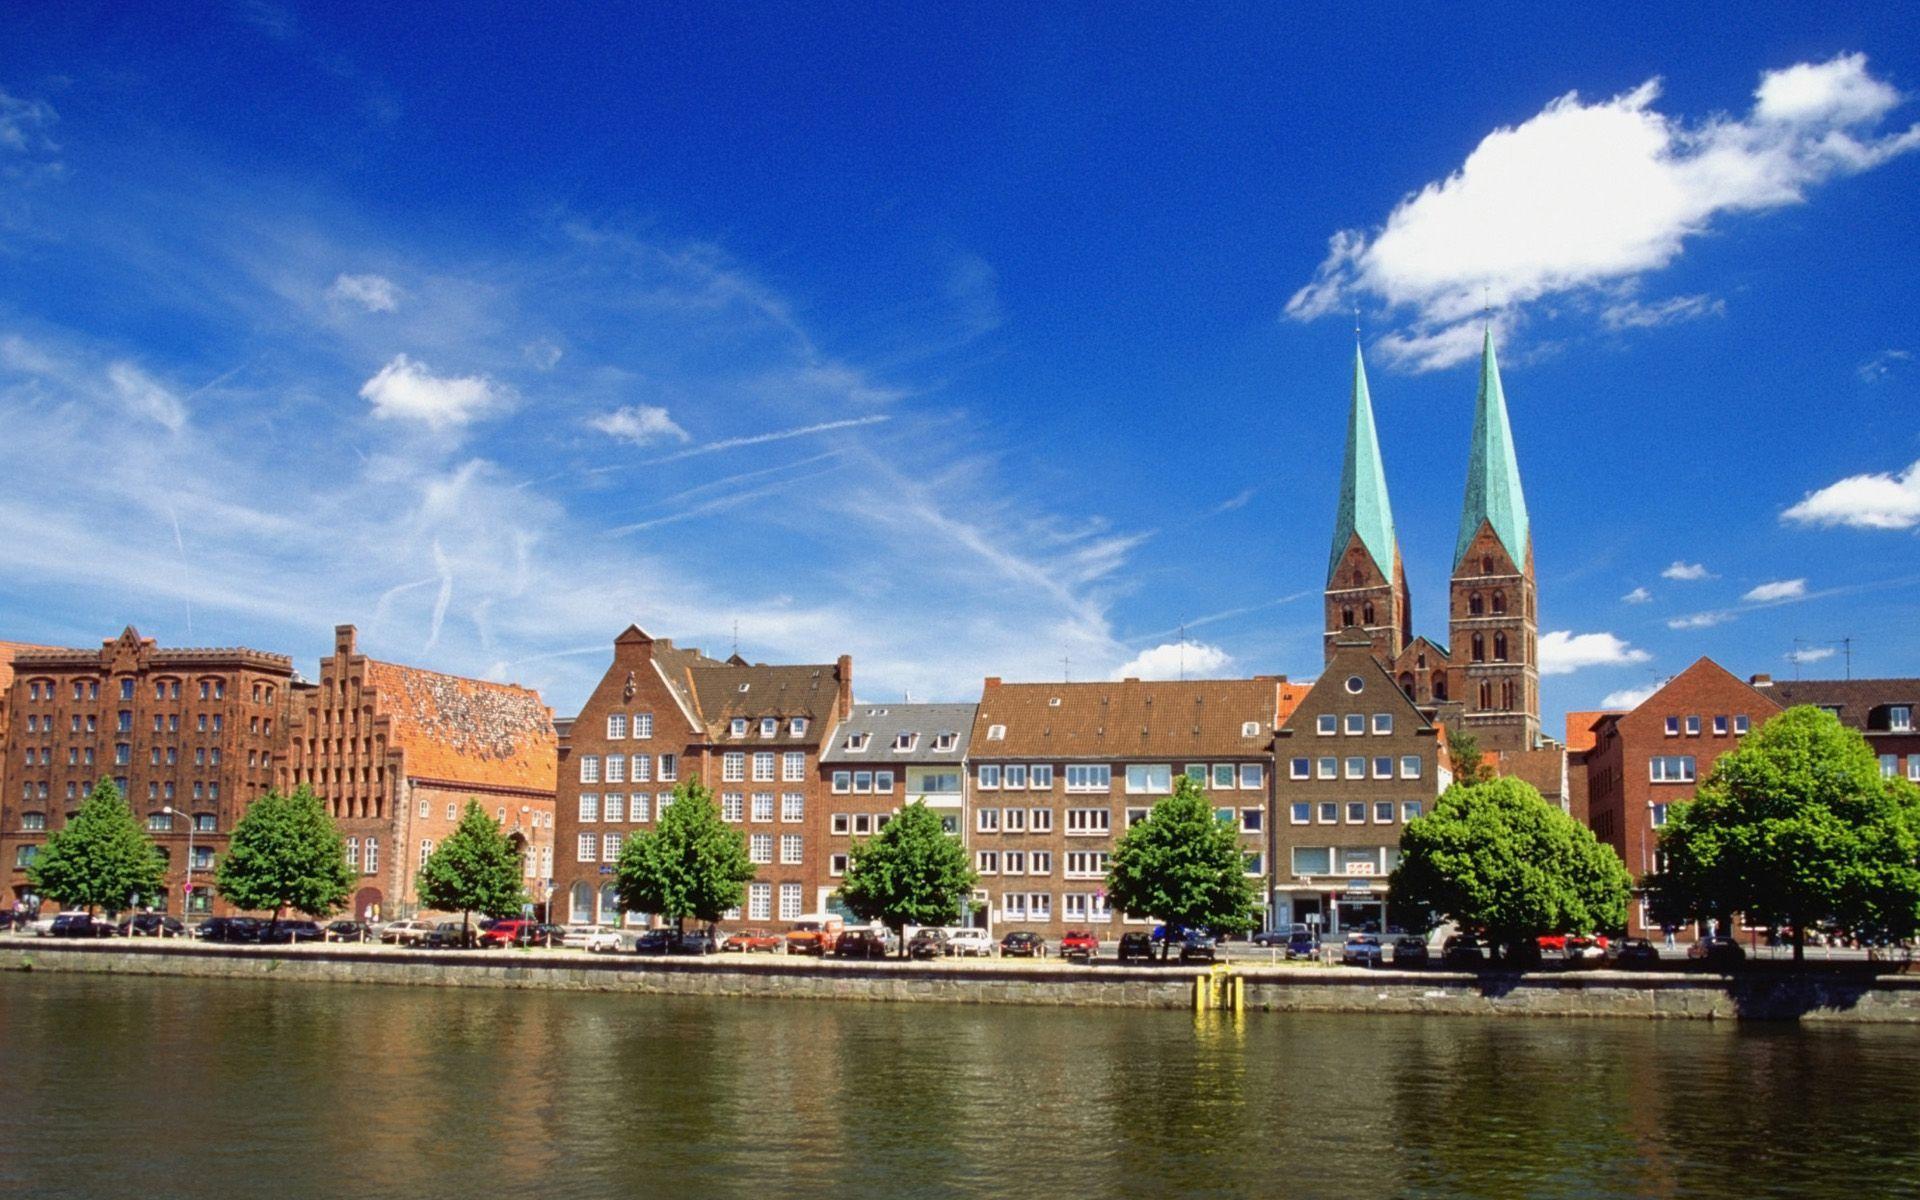 Architecture. Germany wallpaper, Lubeck, Northern europe